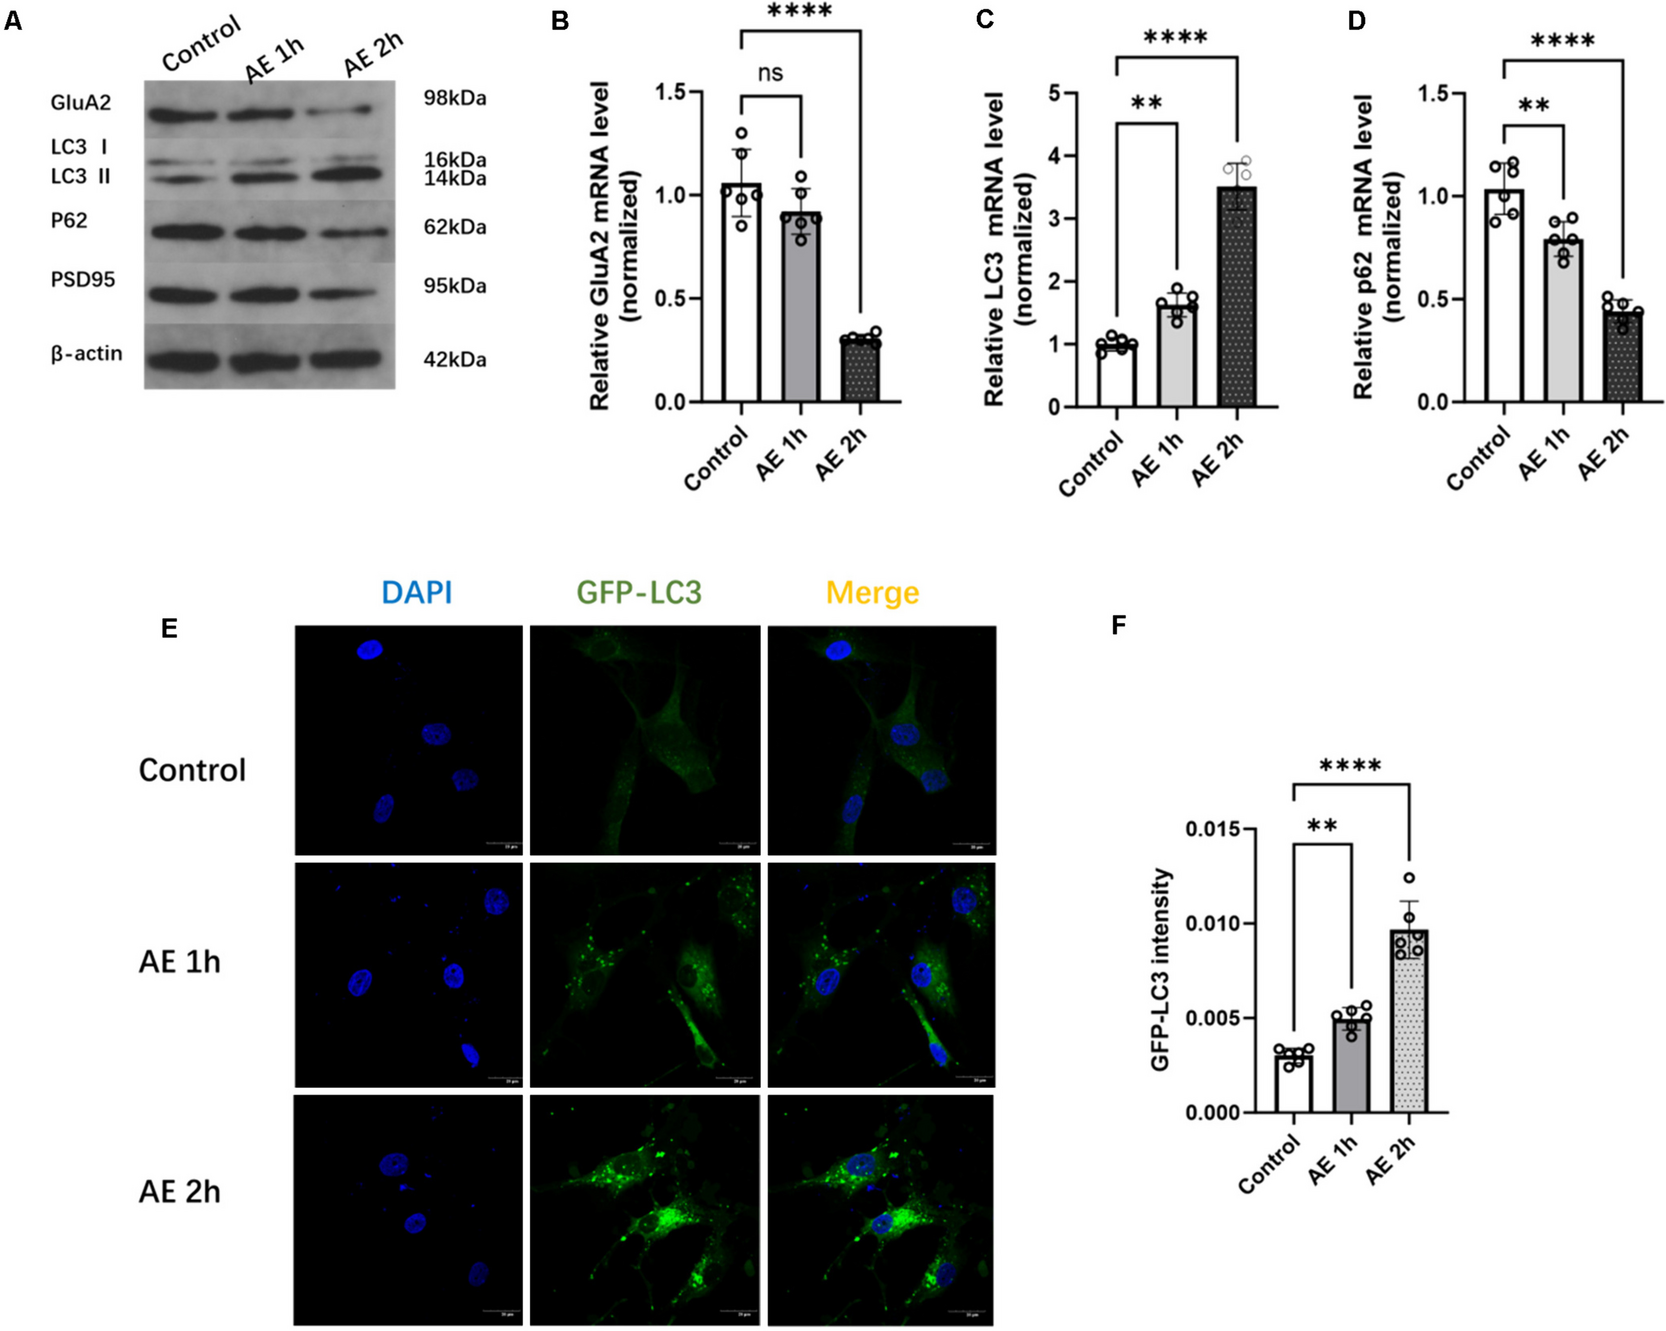 Investigating the Effects of Perampanel on Autophagy-mediated Regulation of GluA2 and PSD95 in Epilepsy